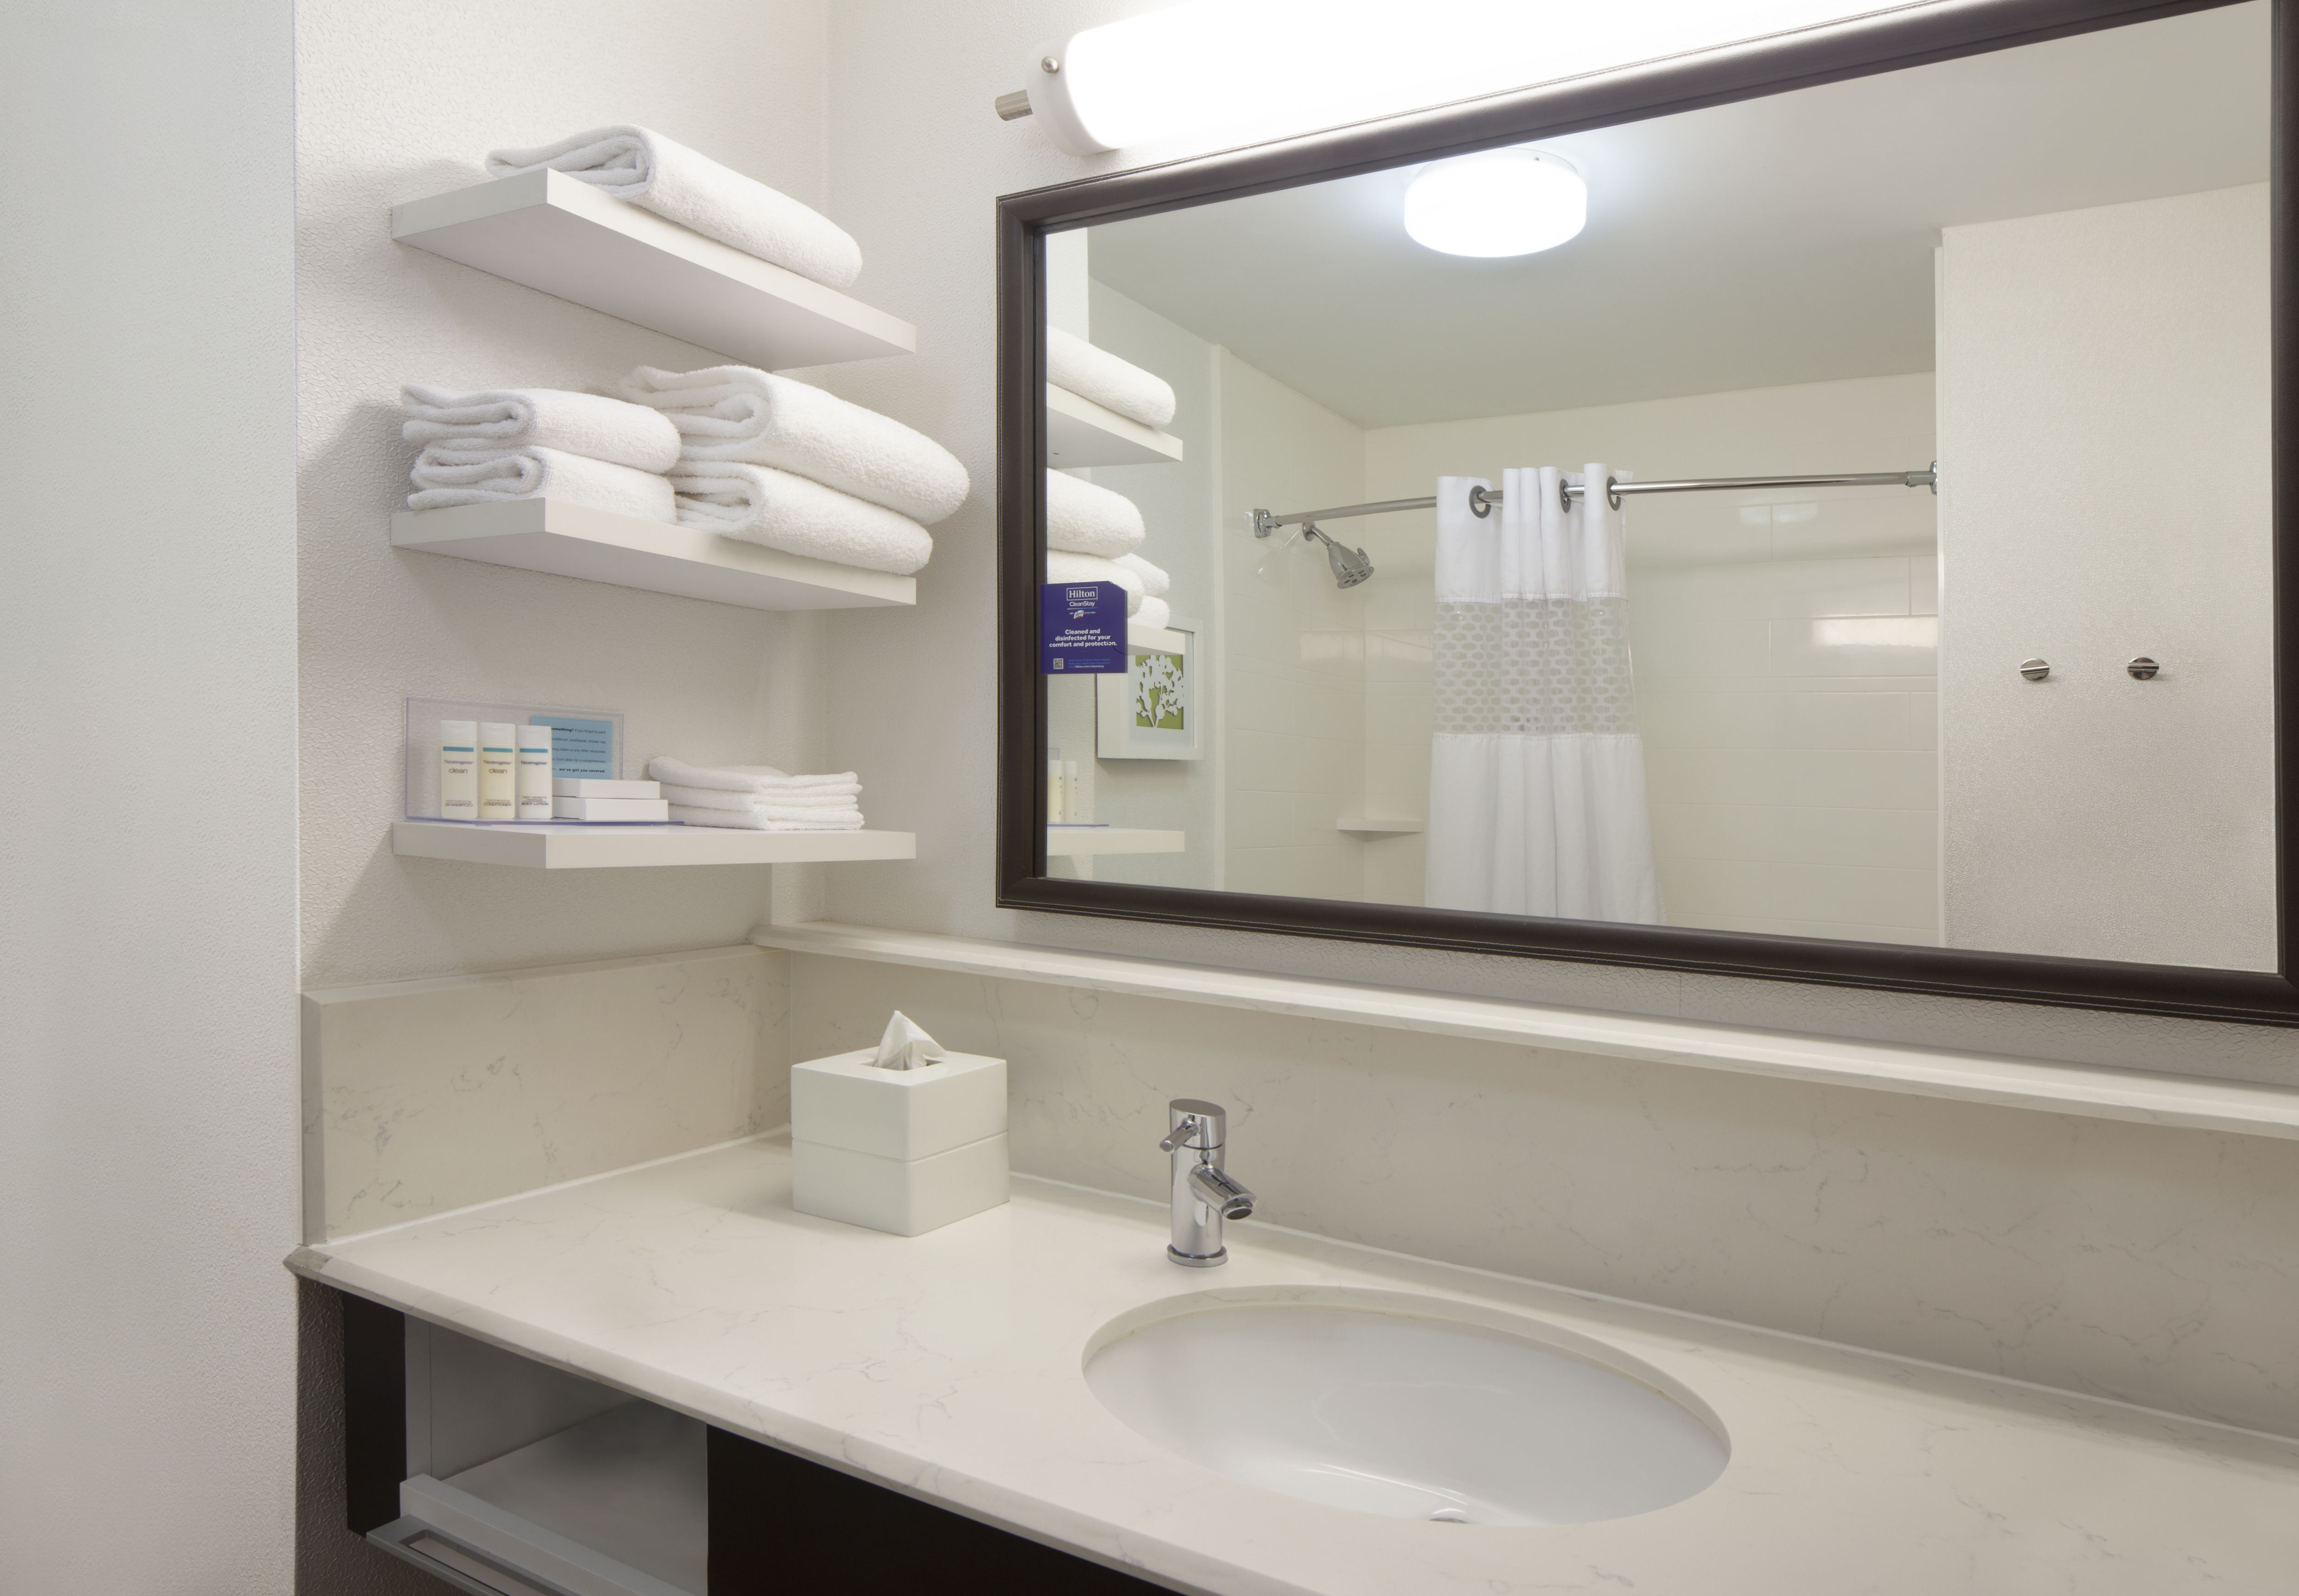 Bathroom Vanity Area with Large Mirror and Amenities in Guest Room